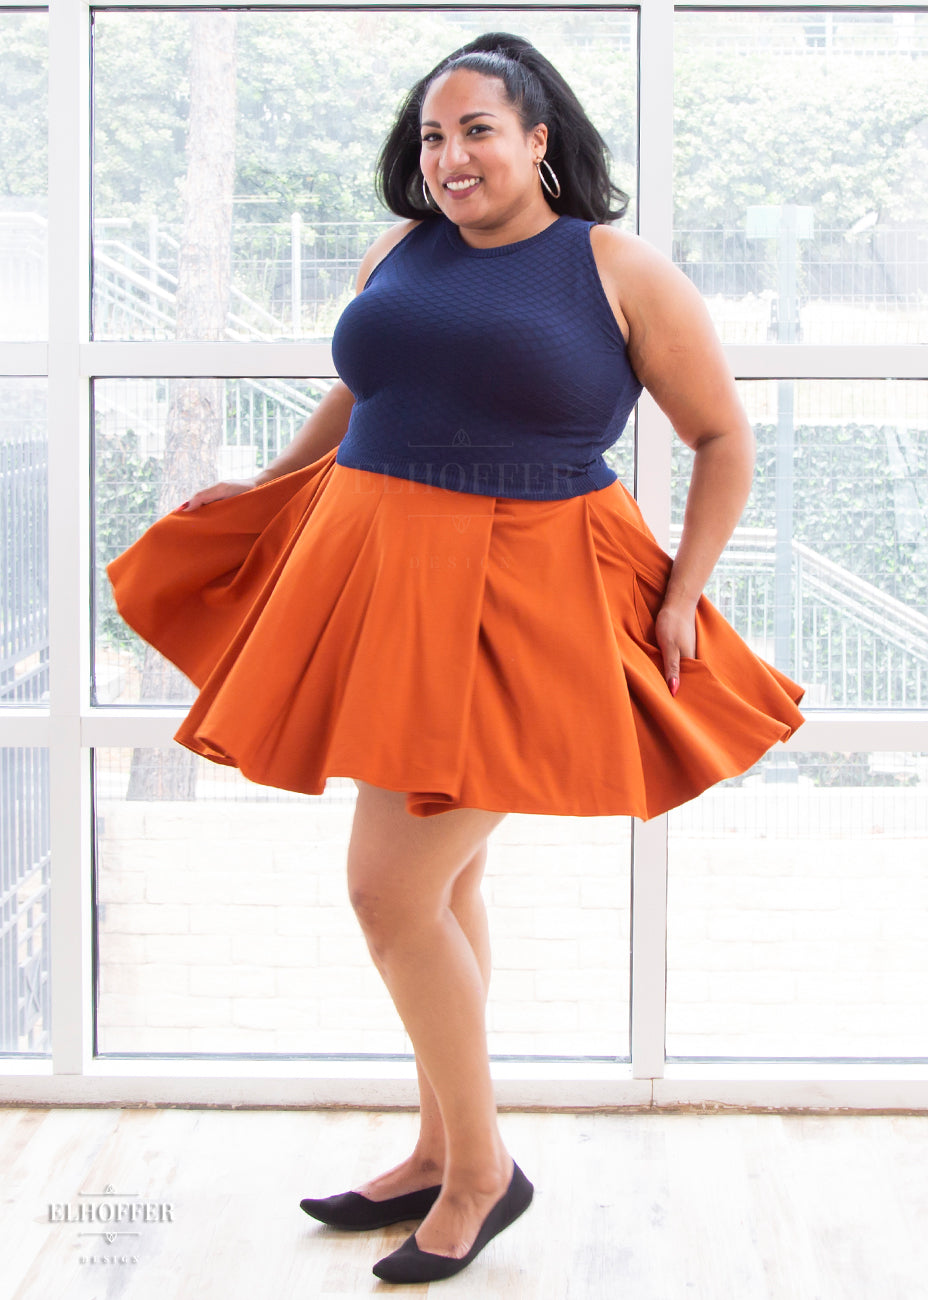 Tas (a medium skinned size 2X model with long dark hair in a ponytail) wears the pleated skater length rust orange ponte skirt with her hands in the skirt's pockets.